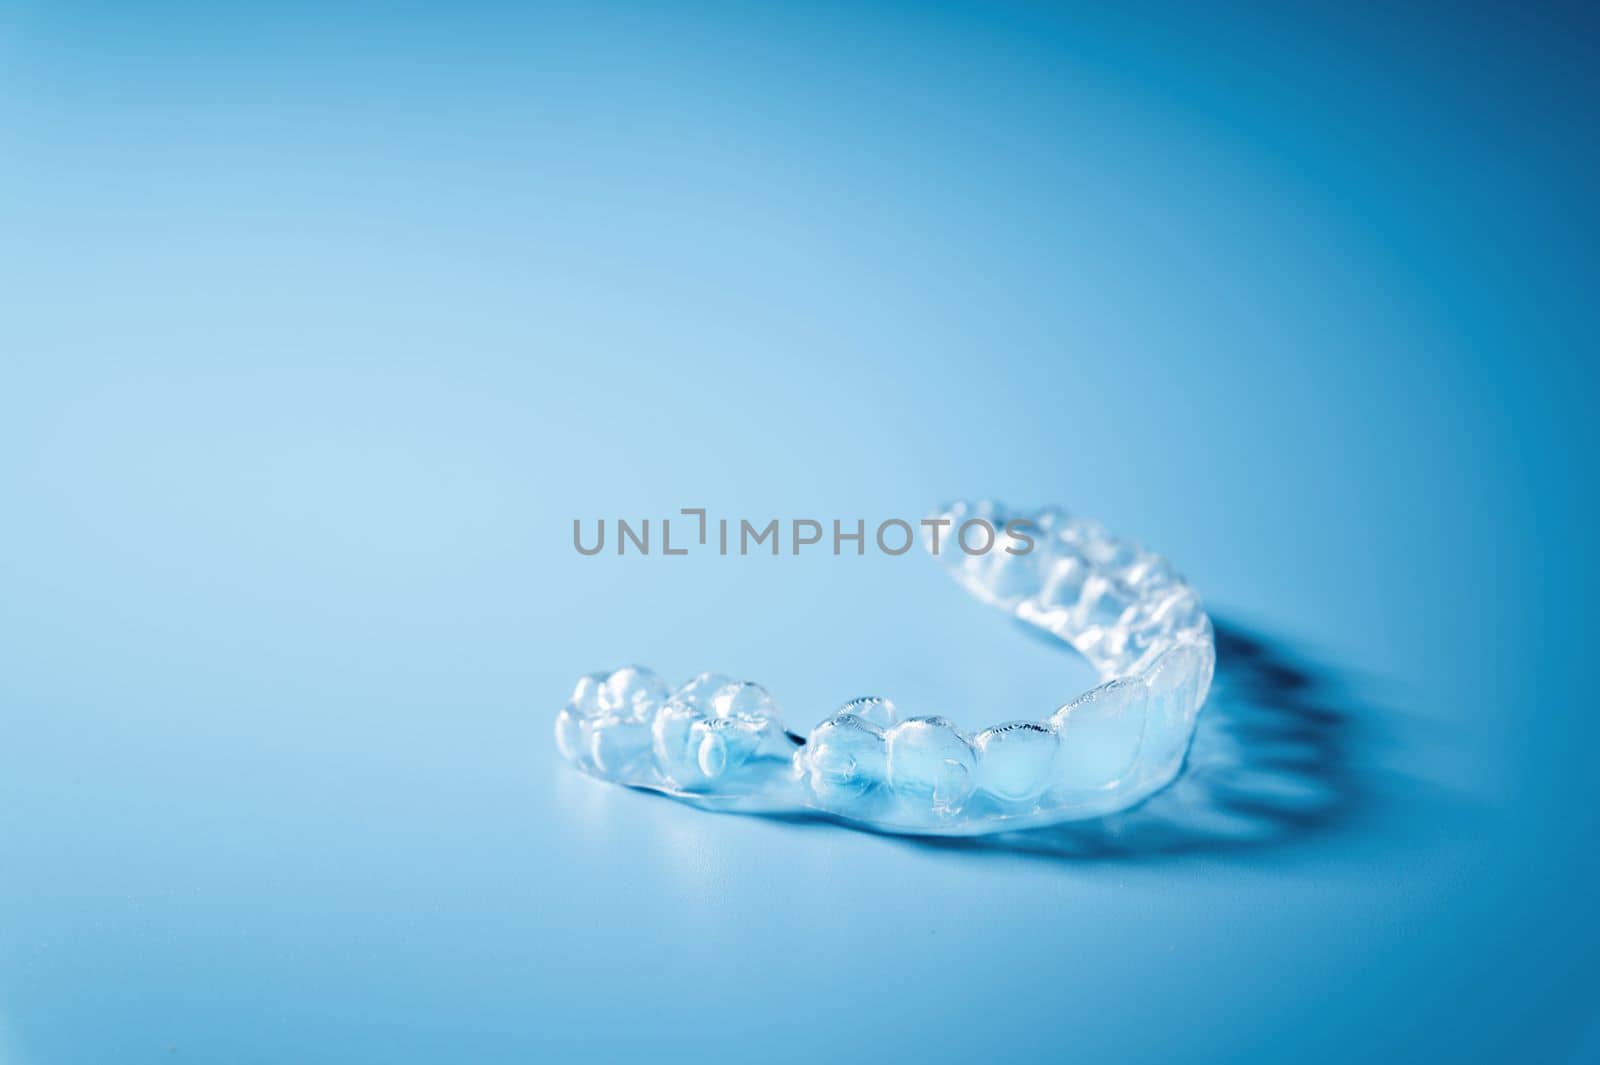 Close up invisible aligners on the blue background with copy space. Plastic braces dentistry retainers to straighten teeth.